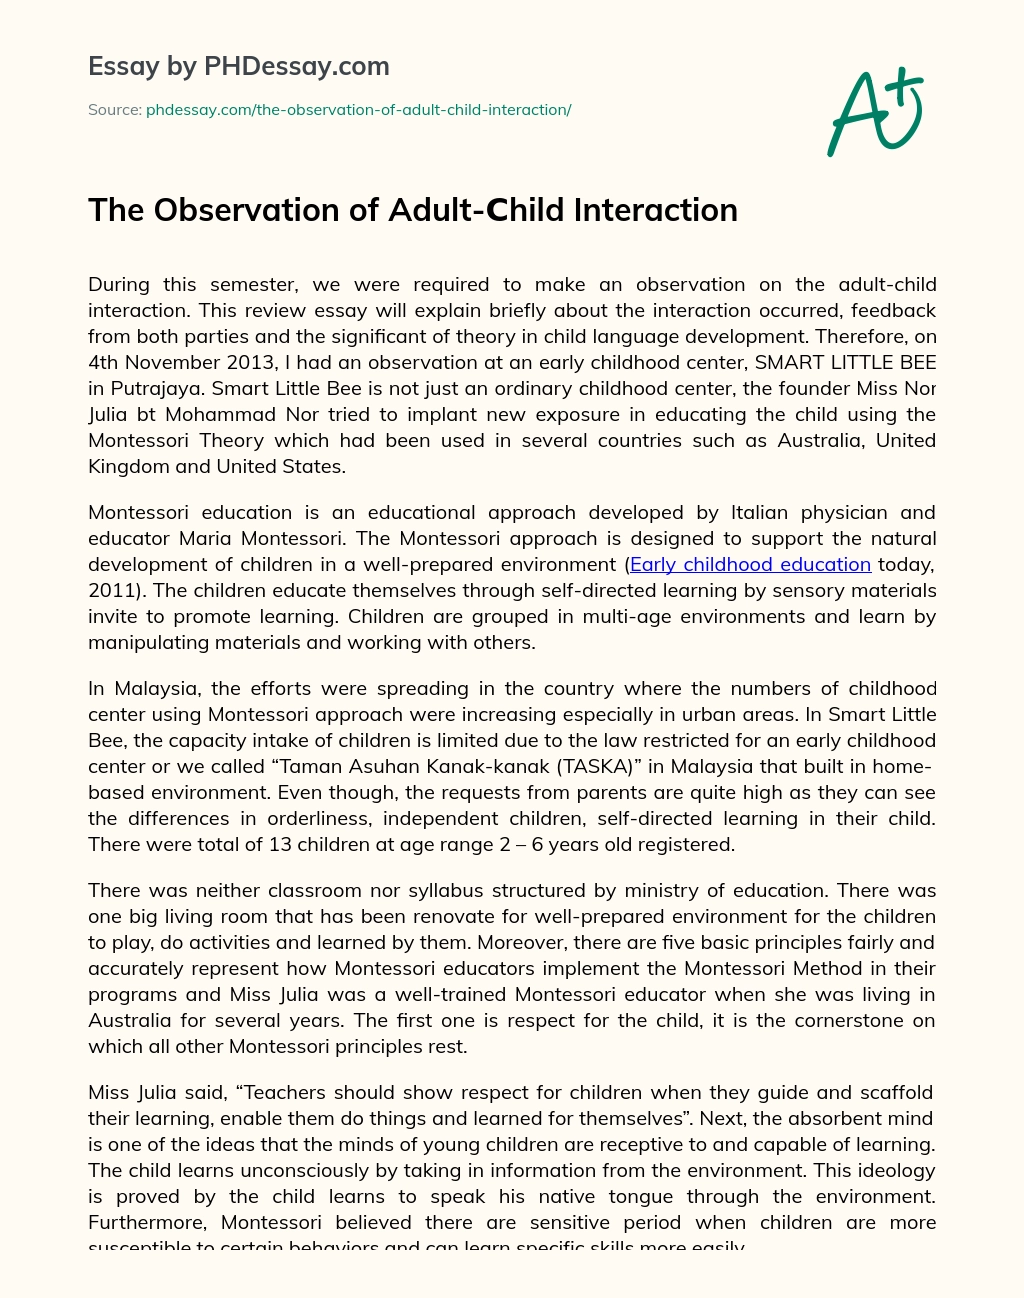 The Observation of Adult-Child Interaction essay